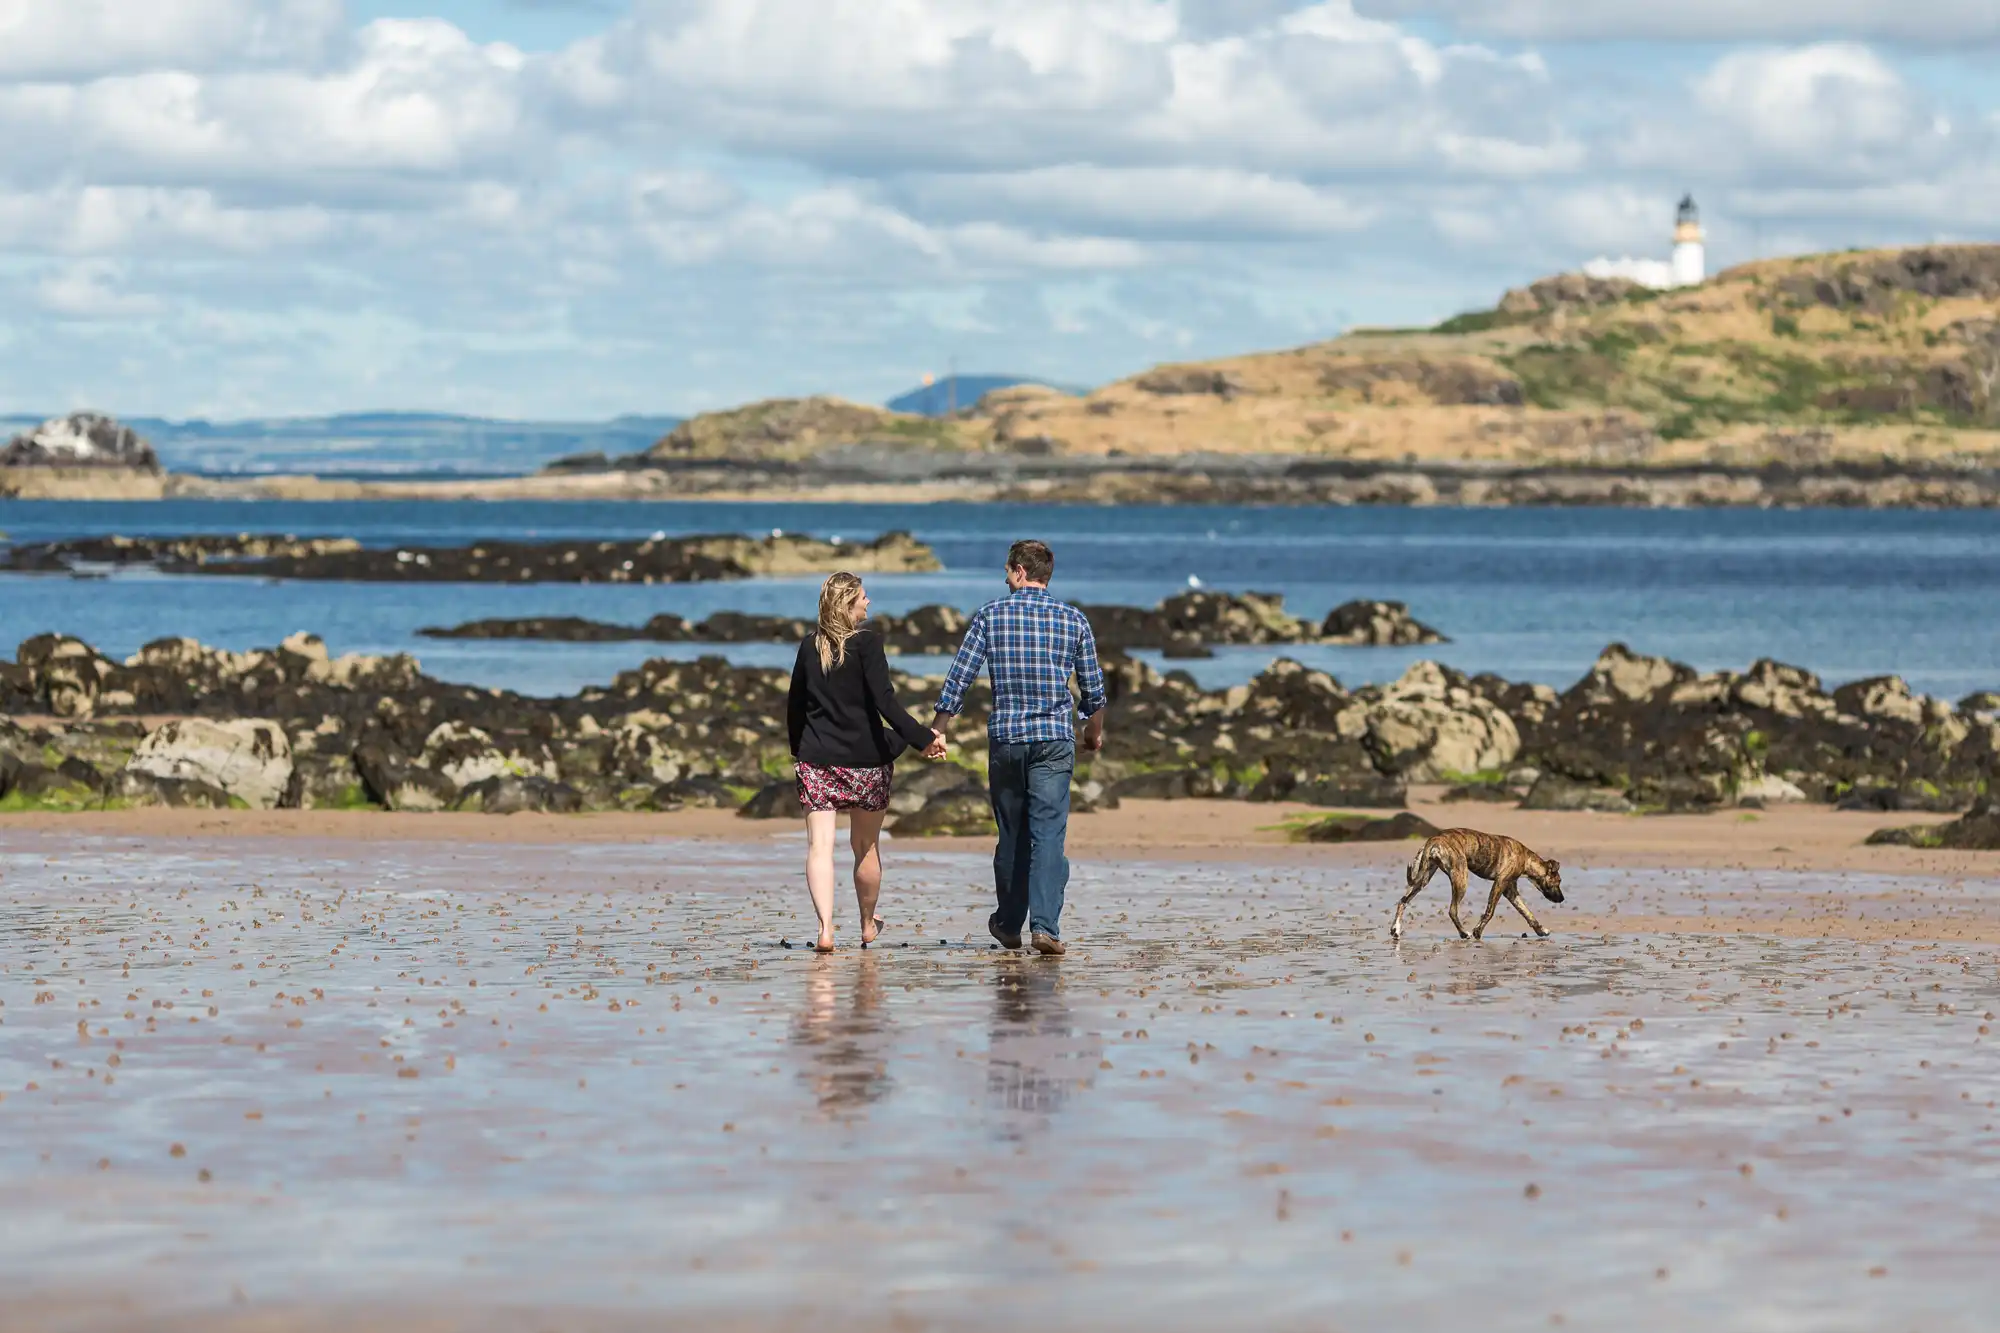 A couple holding hands walks a dog along a wet sandy beach with a lighthouse and rocky islets in the background under a cloudy sky.